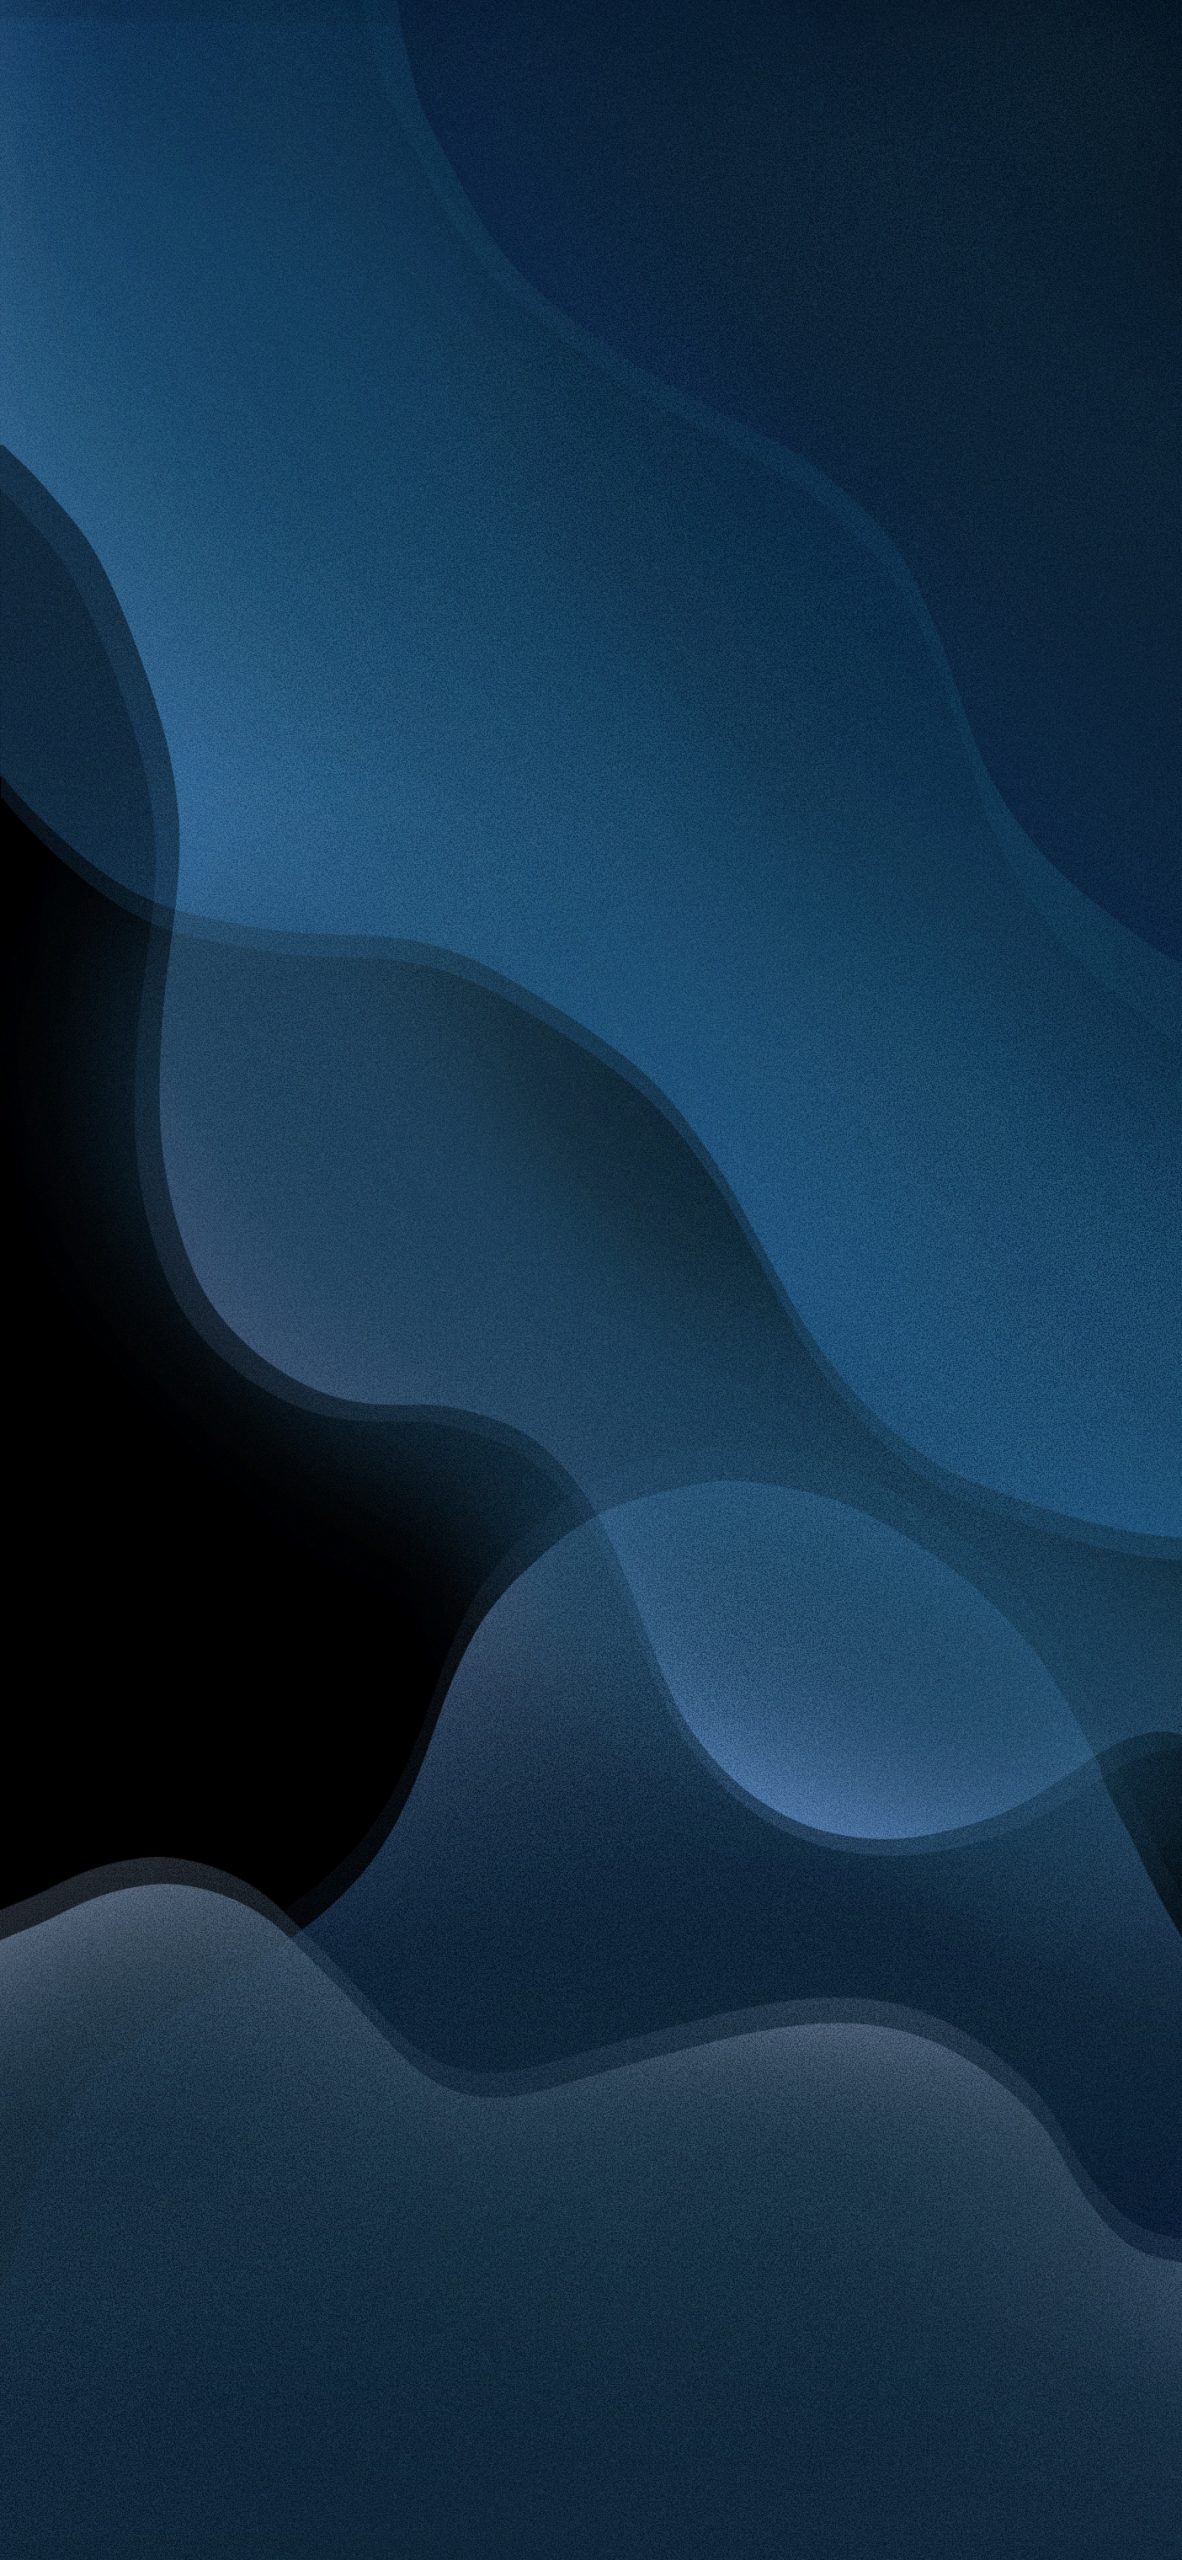 Wallpaper (Wallpaper) Navy Blue Color Theme for iPhone